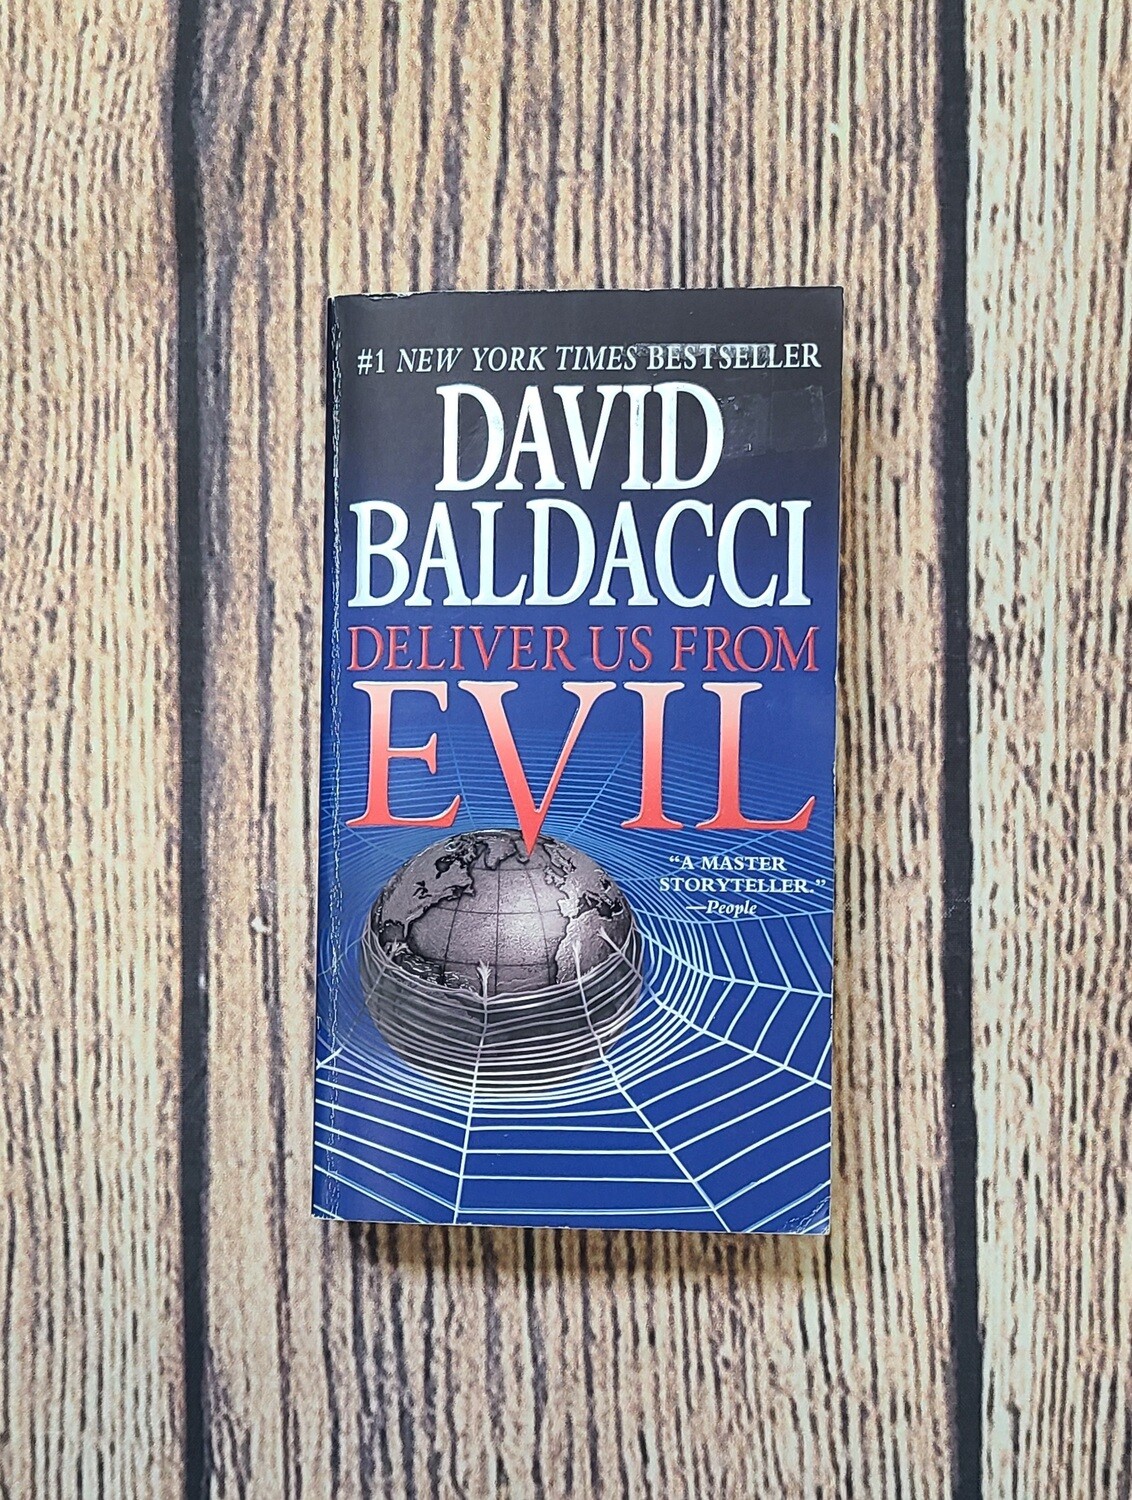 Deliver us from Evil by David Baldacci